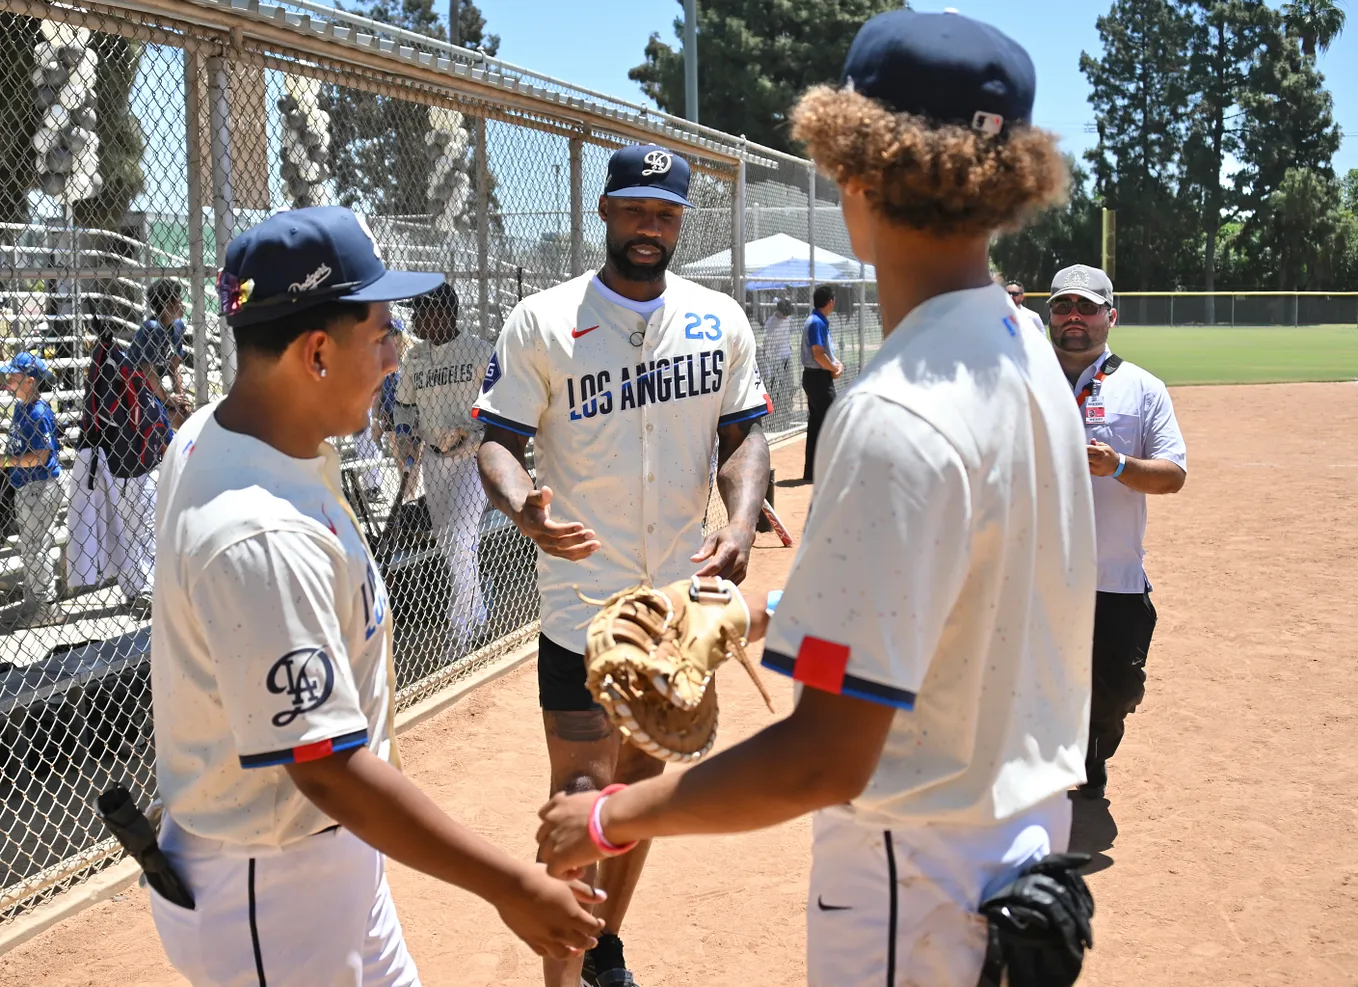 LADF’s Dodger Dreamteam, joined by players and legends, are first to take the field in Nike City…